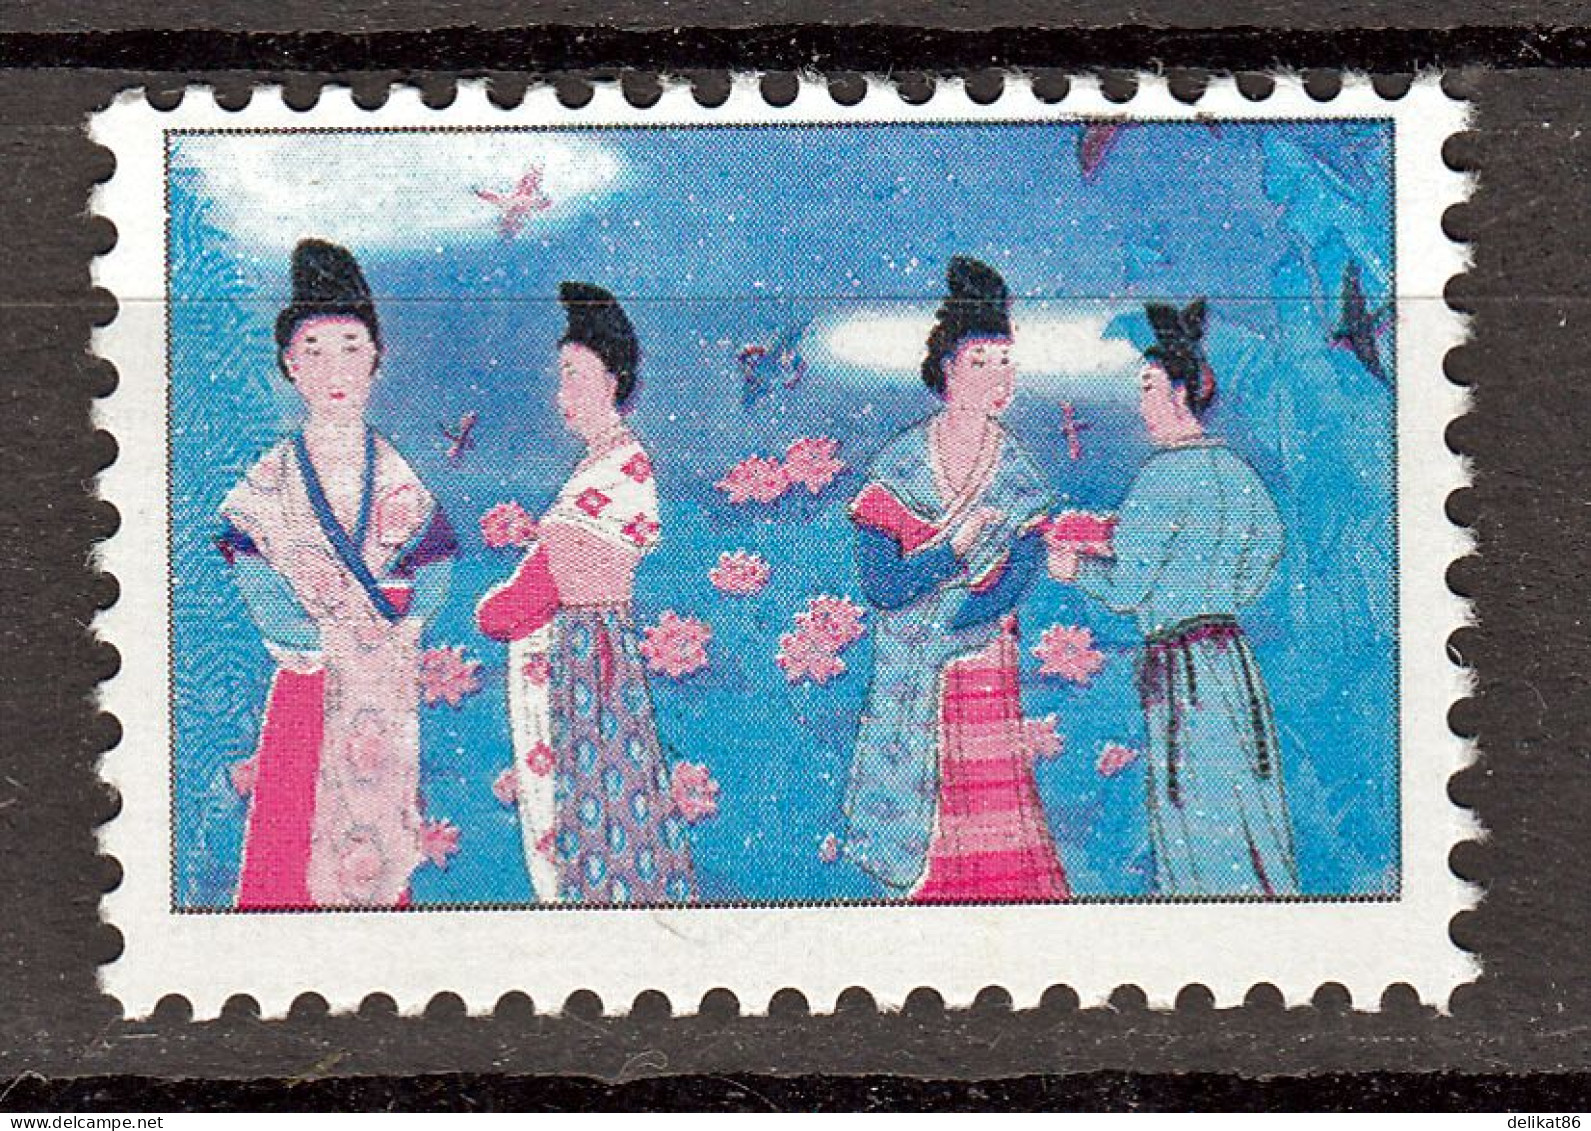 Probedruck Test Stamp Specimen China 1997  "Tang Dynasty Painting" - Proofs & Reprints